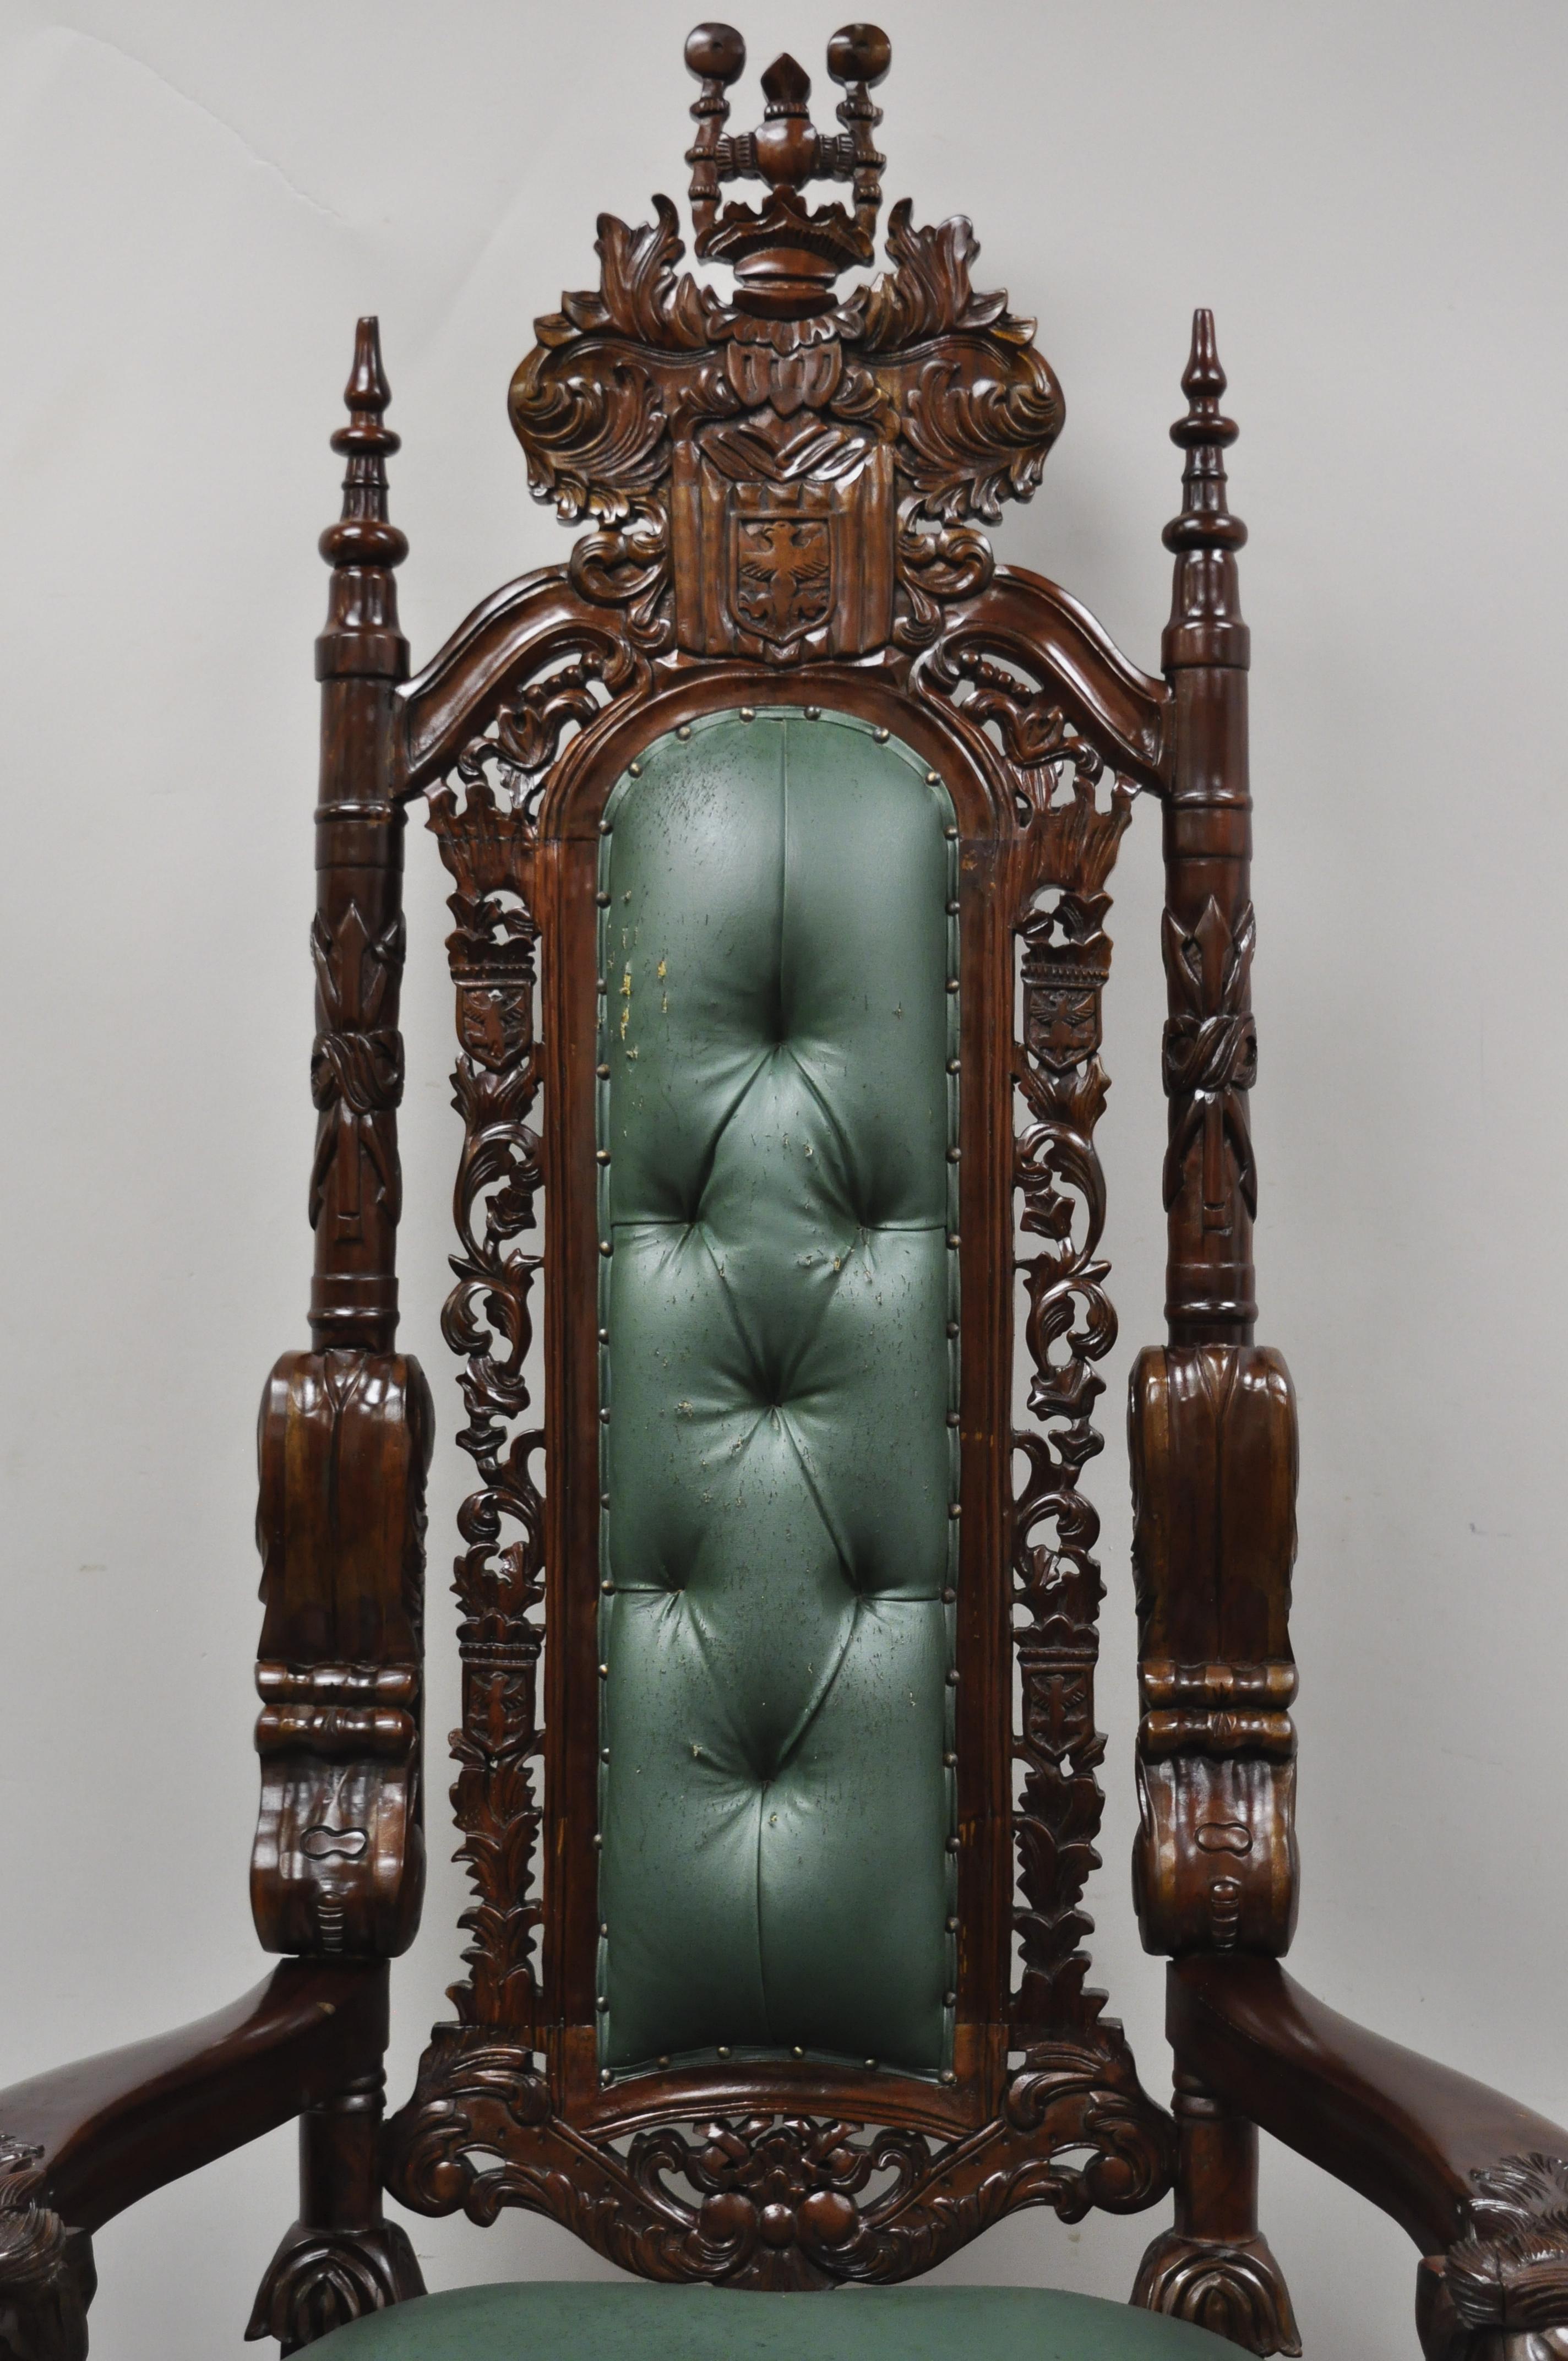 Lion carved large tall king queen throne chair event party space decor. Item features large monumental size, solid wood construction, nicely carved details, great style and form, circa late 20th-early 21st century. Measurements: 71.5